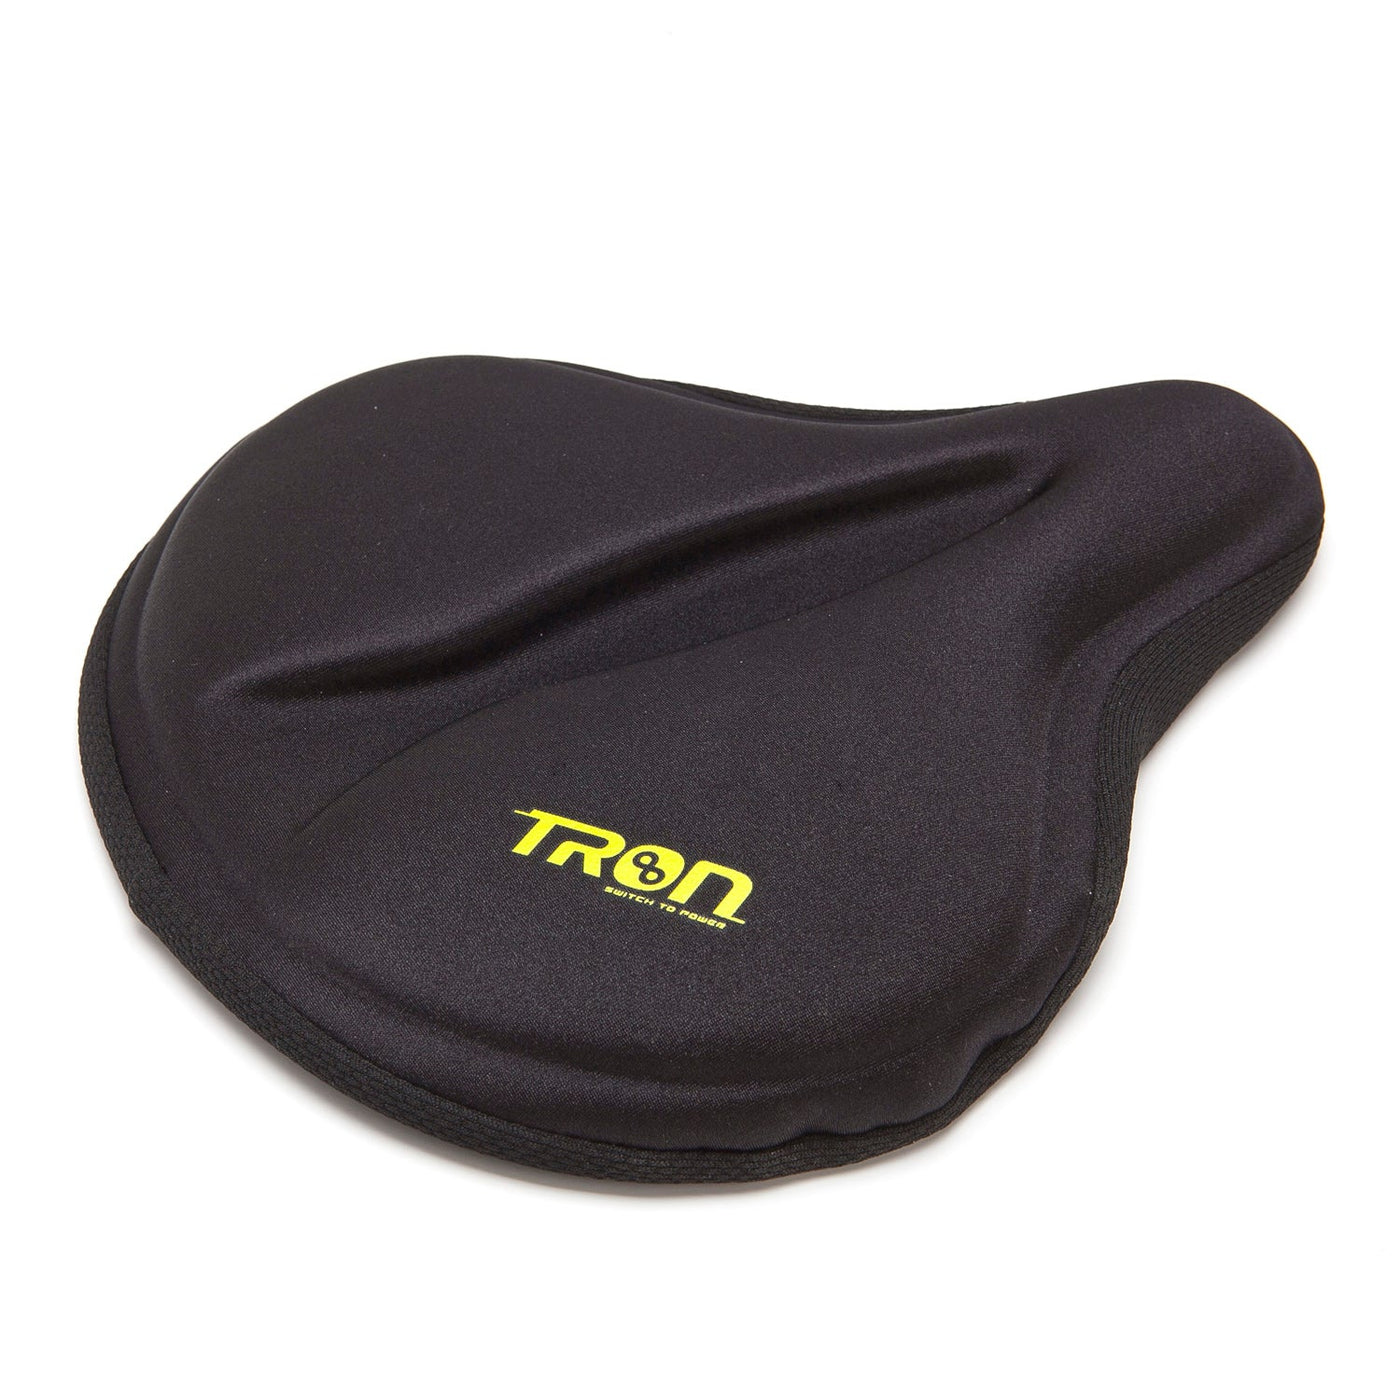 Tron Bicycle Gel Saddle Cover 229-254 X 216-241Mm VSA20-VLC043 - Cyclop.in